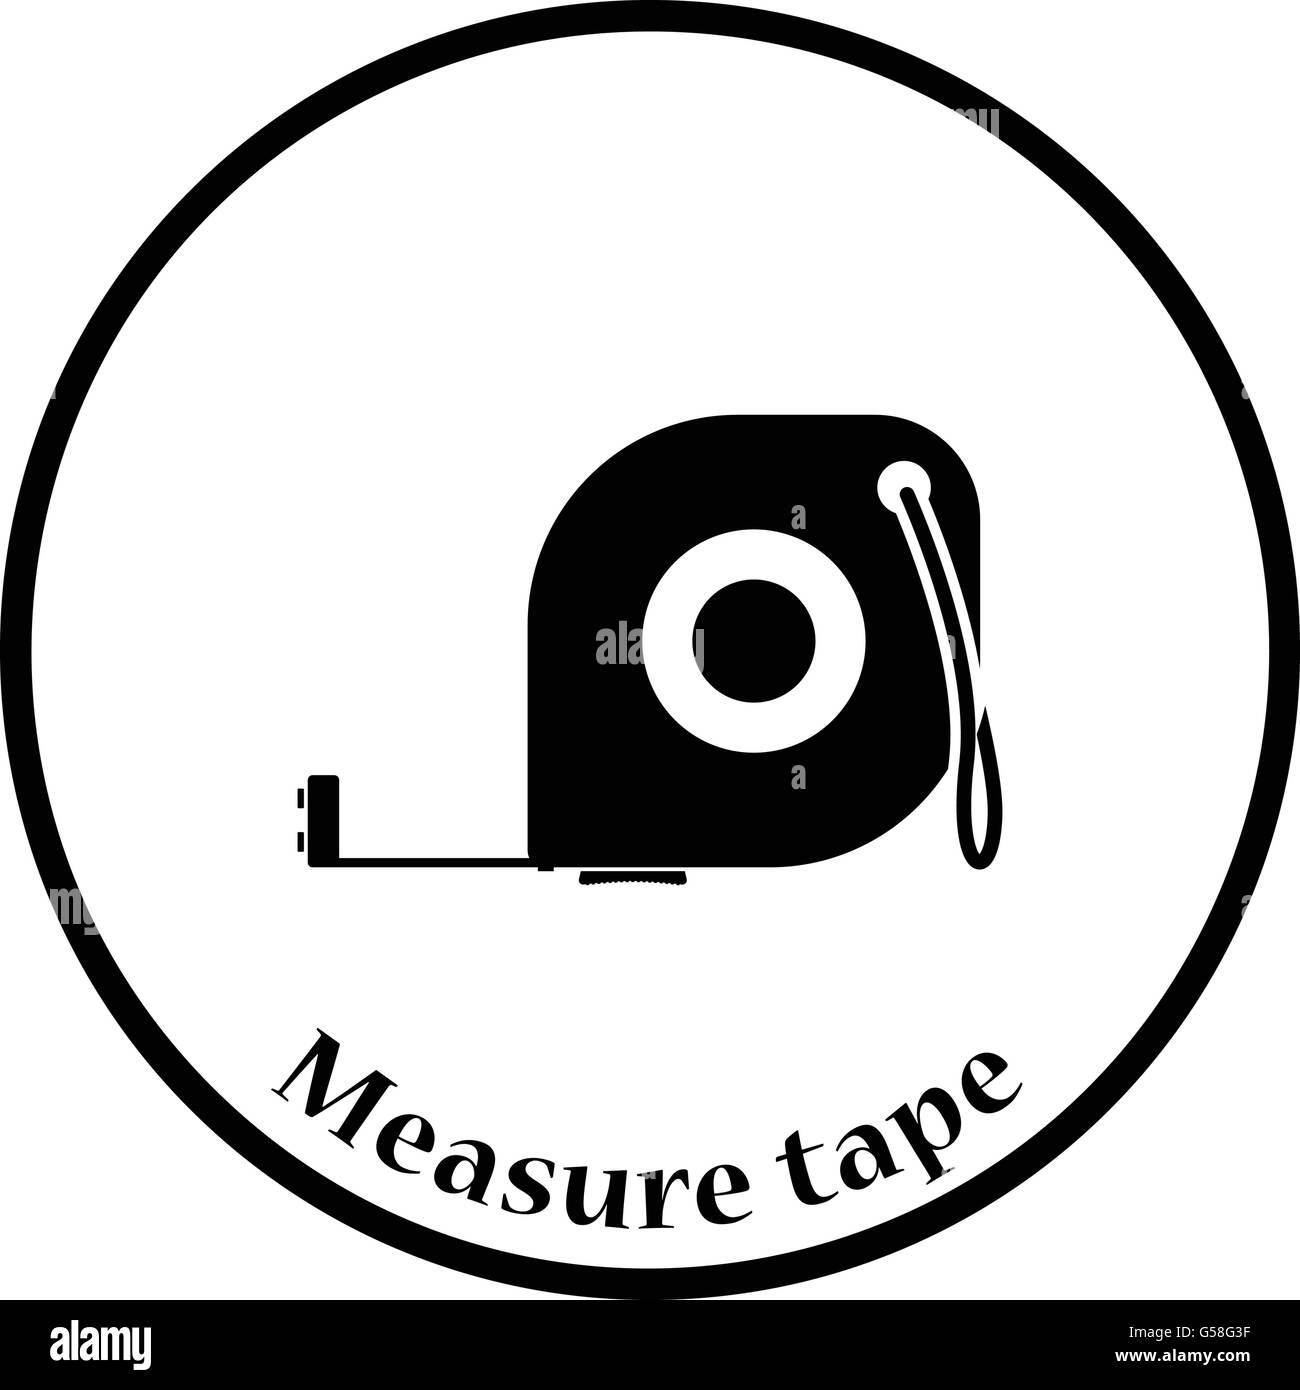 Icon of constriction tape measure. Thin circle design. Vector illustration. Stock Vector